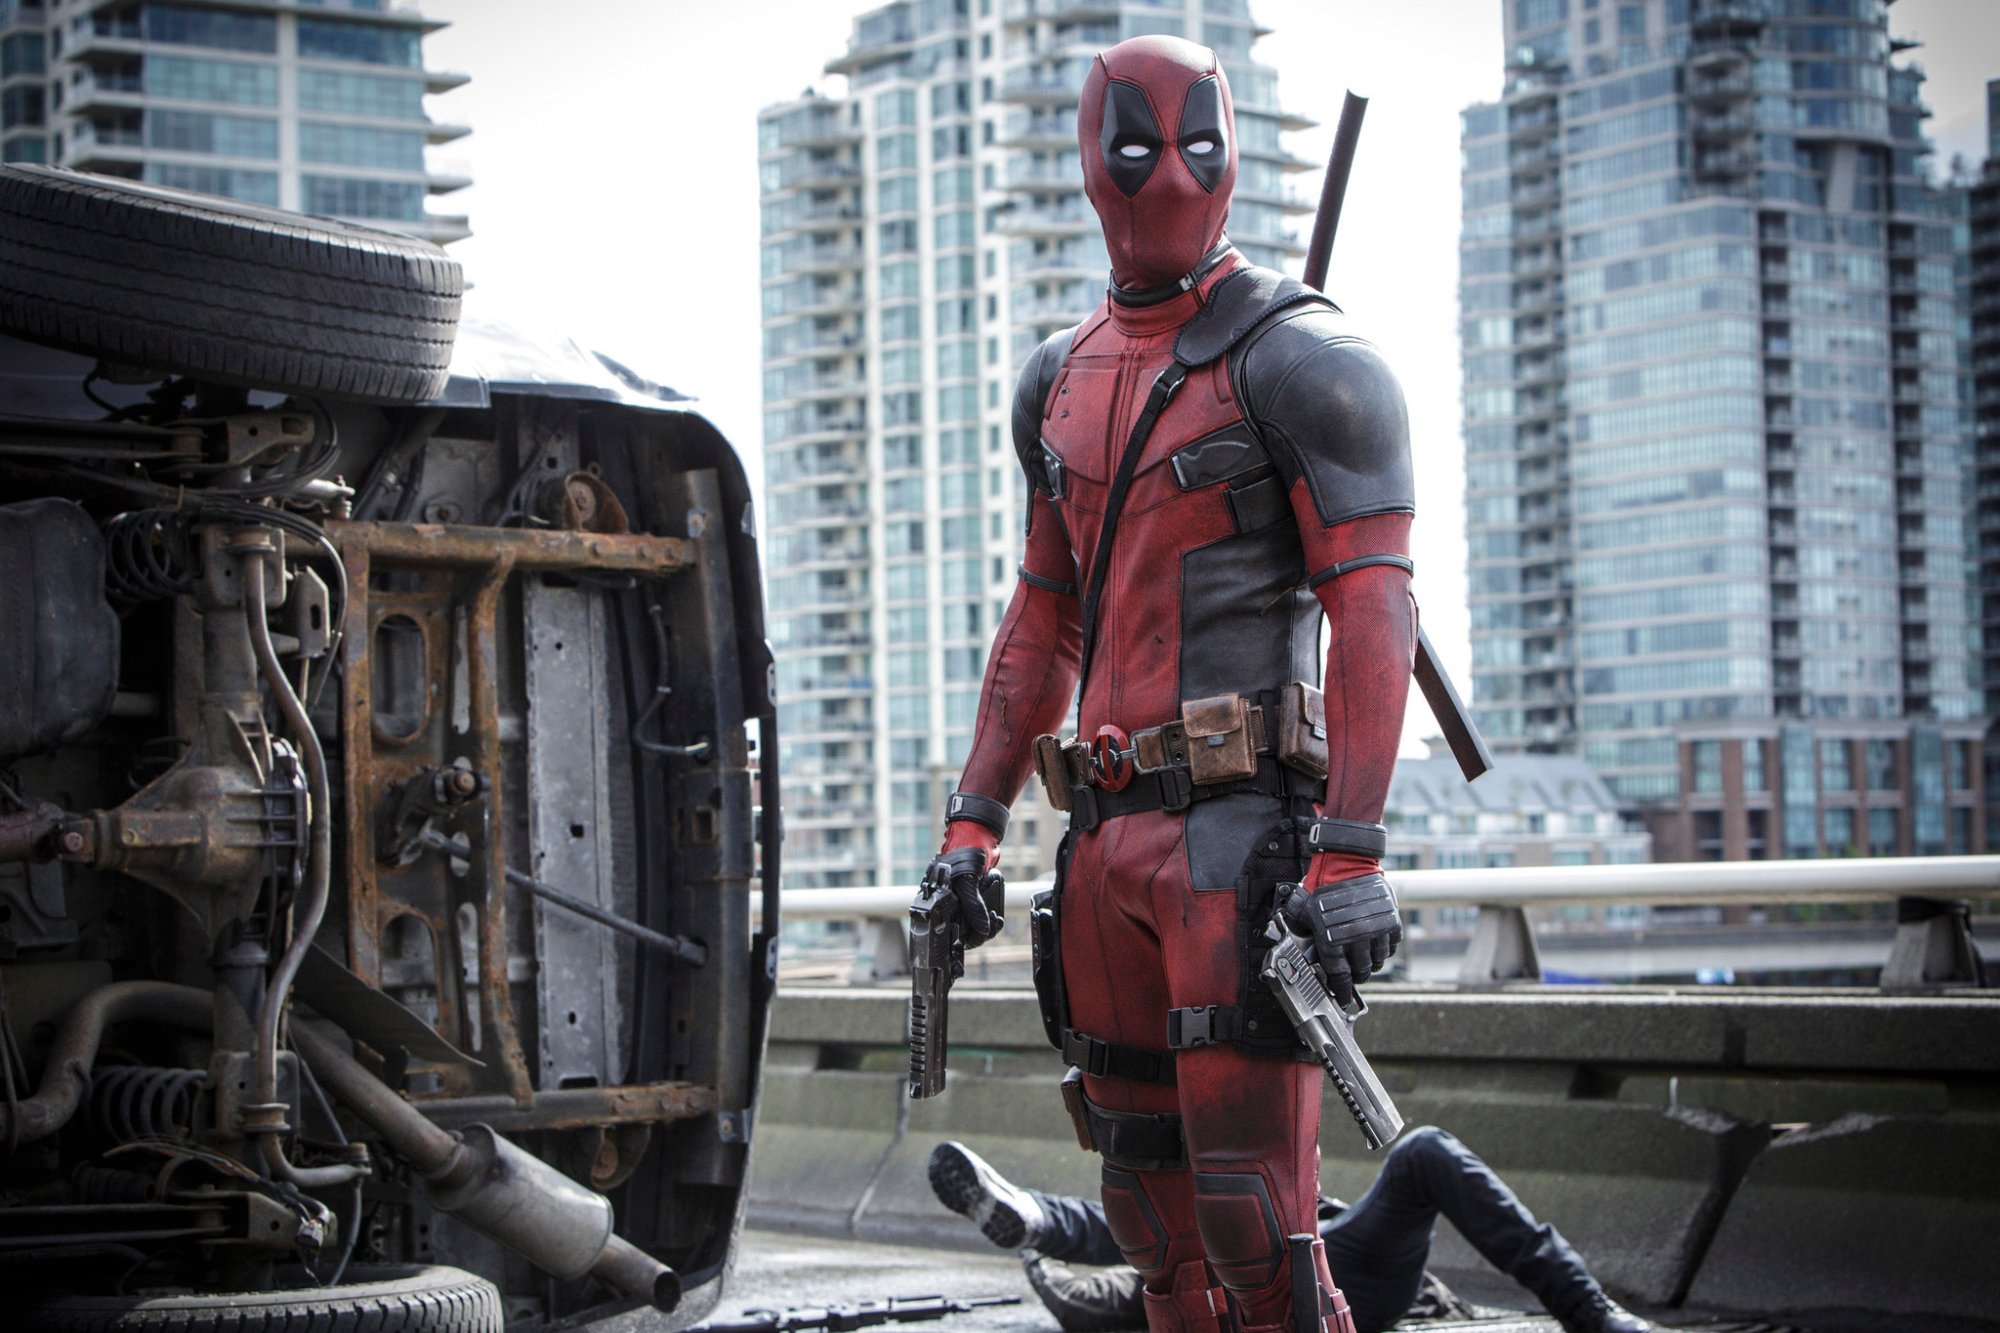 ‘Deadpool’ Fans Hope for a Hilarious, Comic-Accurate Entrance to the MCU